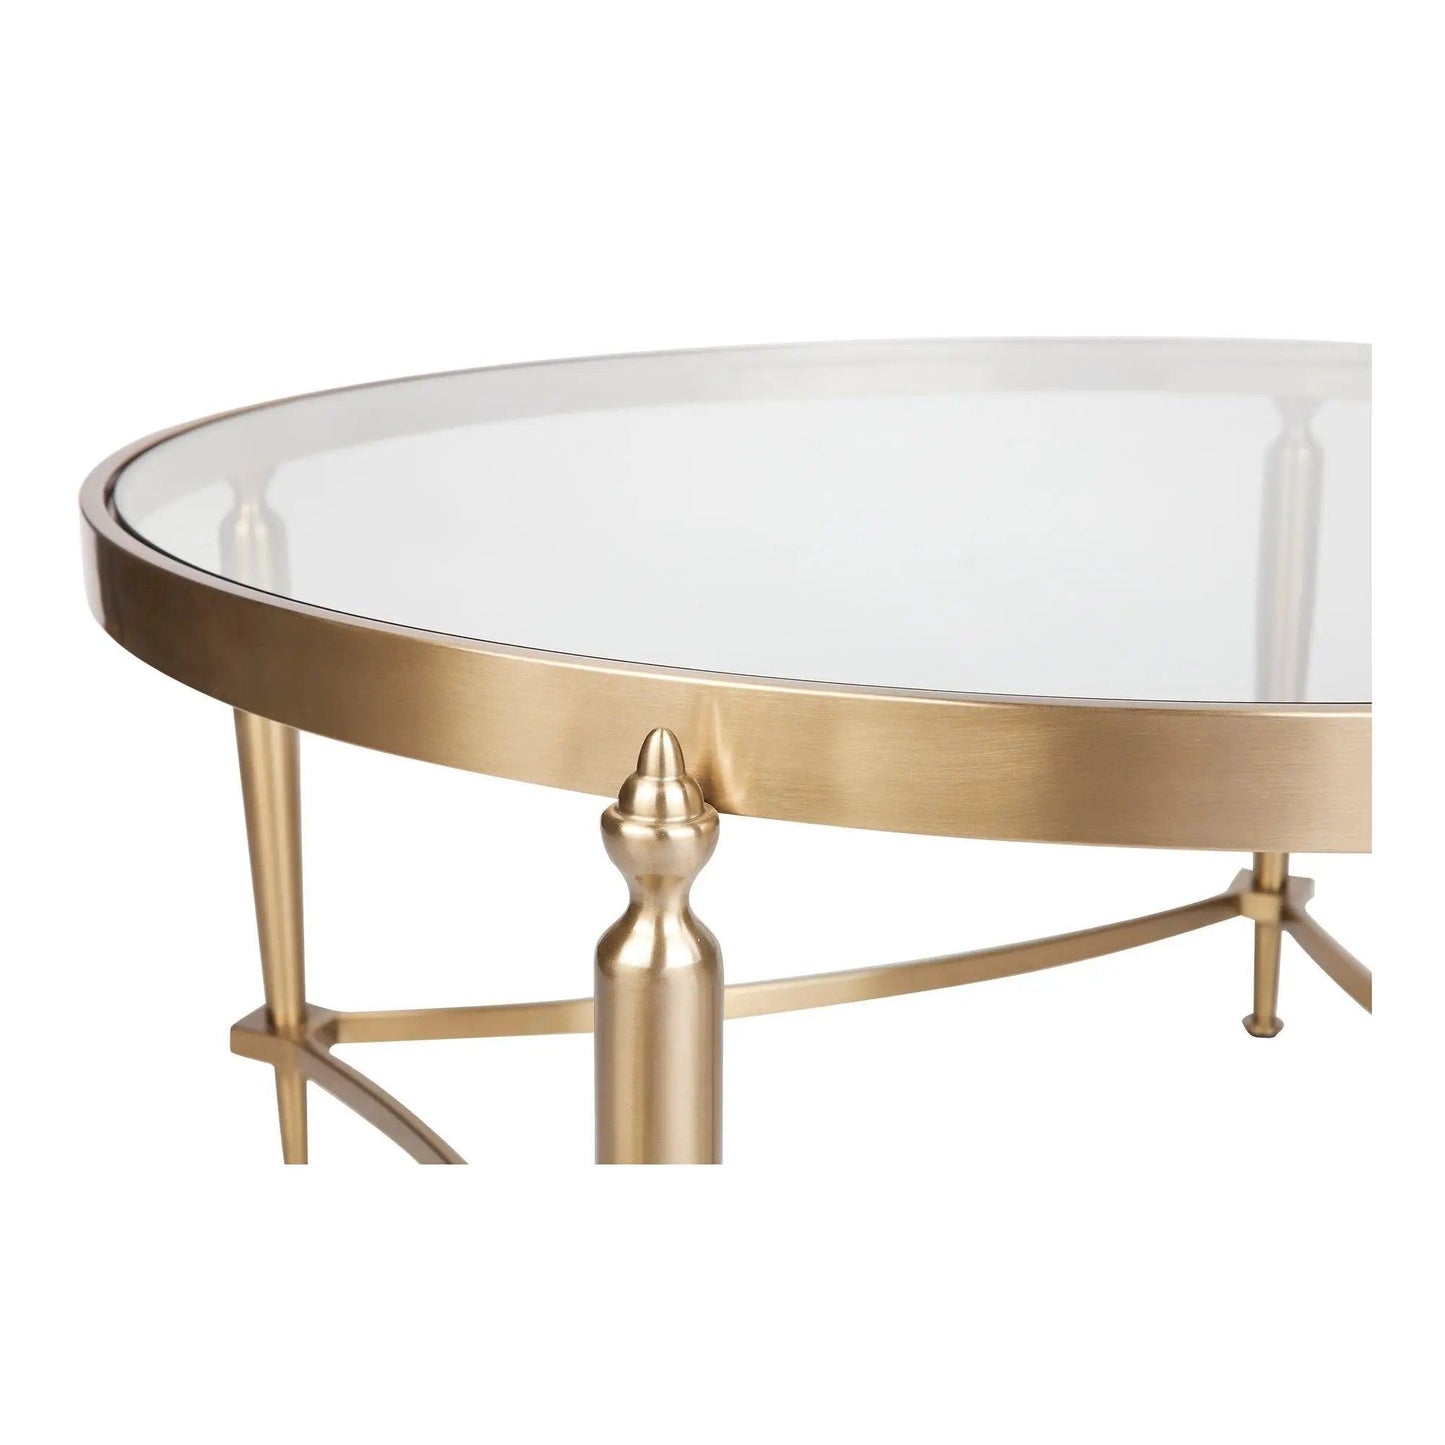 Jak Glass Coffee Table - Gold - Coffee Table322549320294115510 4